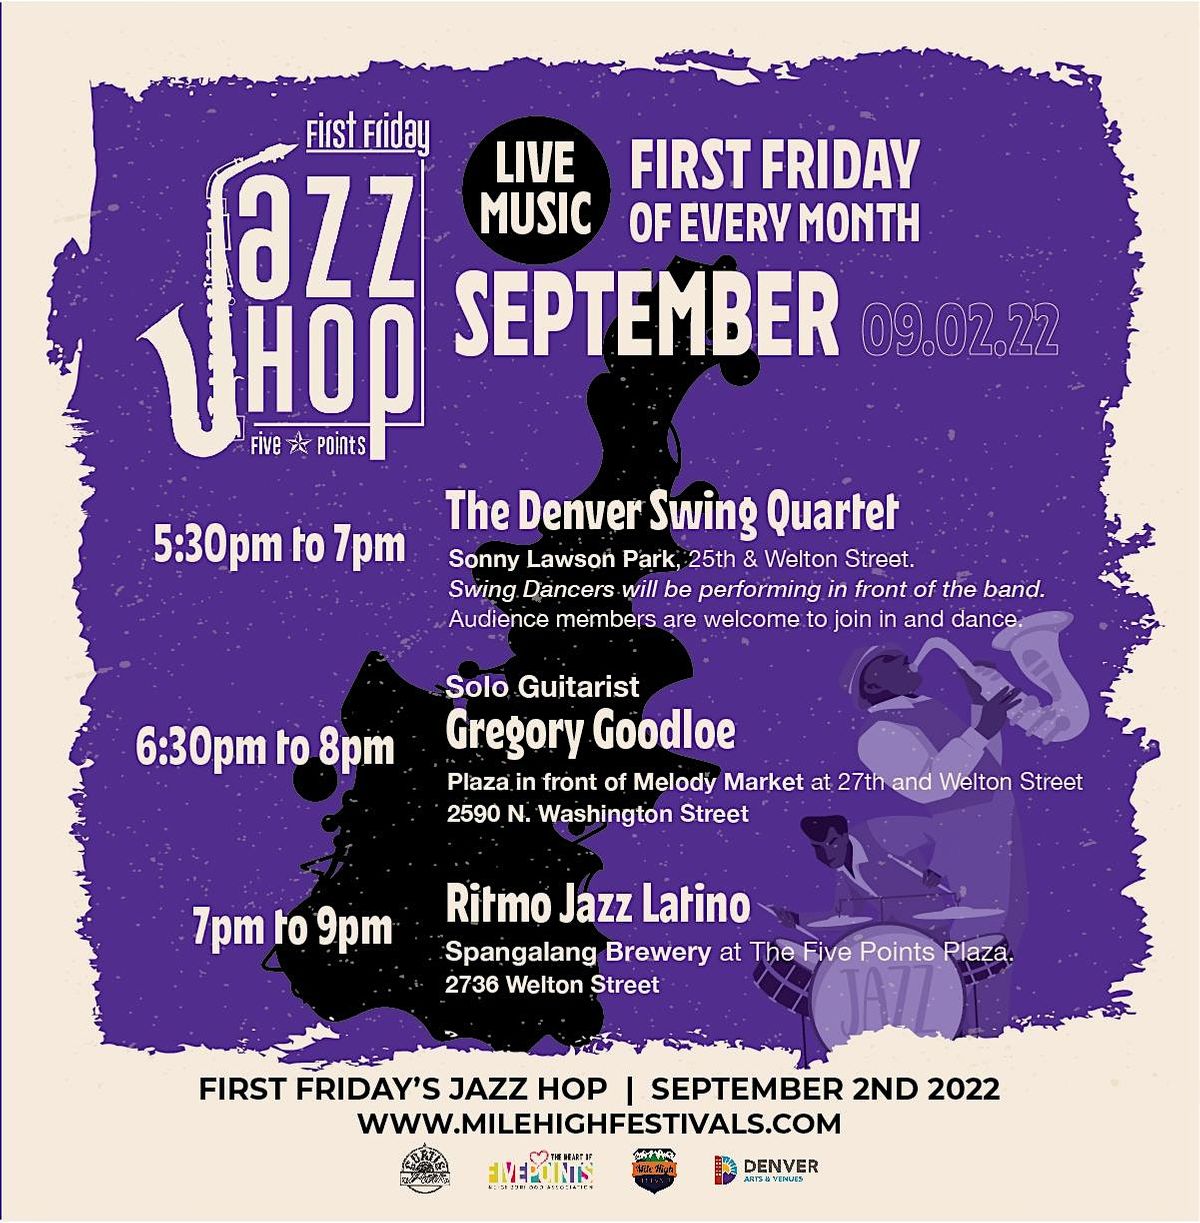 First Friday - Five Points Jazz Hop